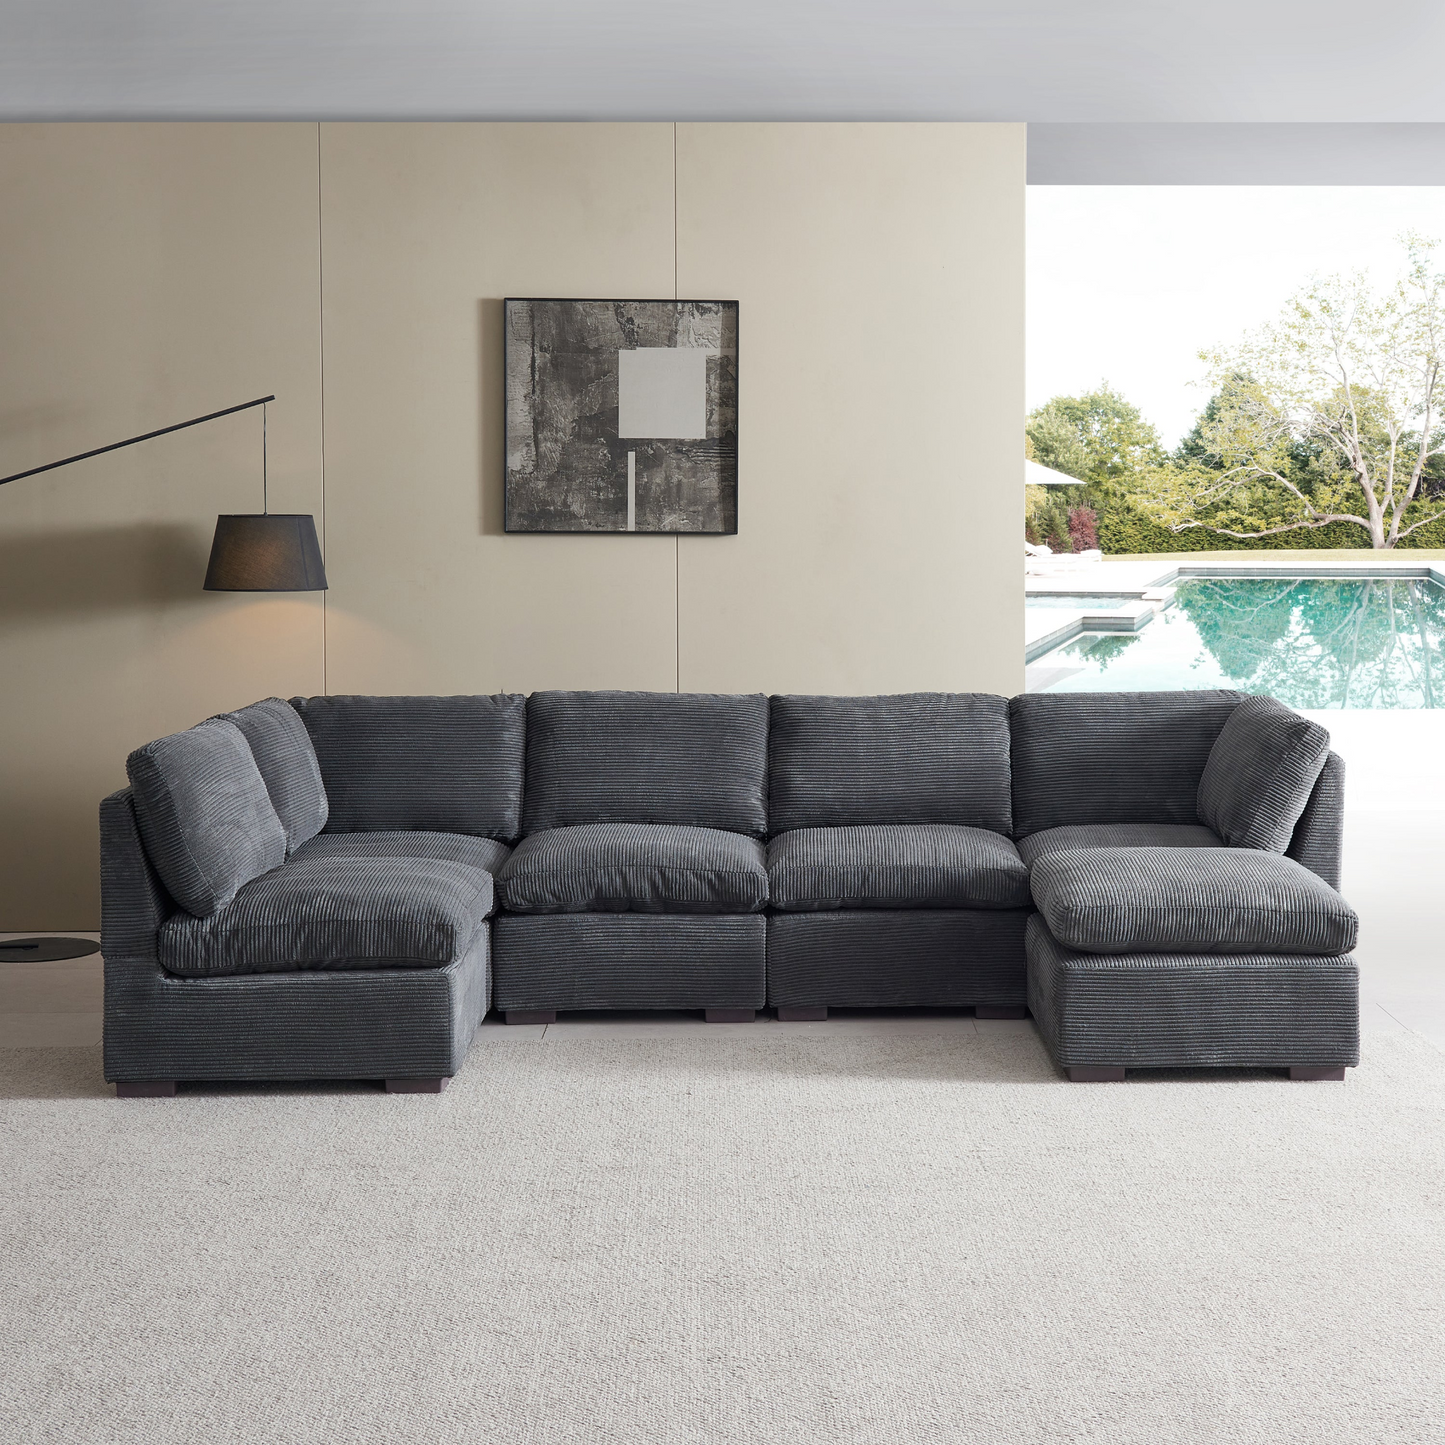 Convertible Modern Luxury Sectional Sofa Couch for Living Room Quality Corduroy Upholstery Modular Sofa Dark Grey